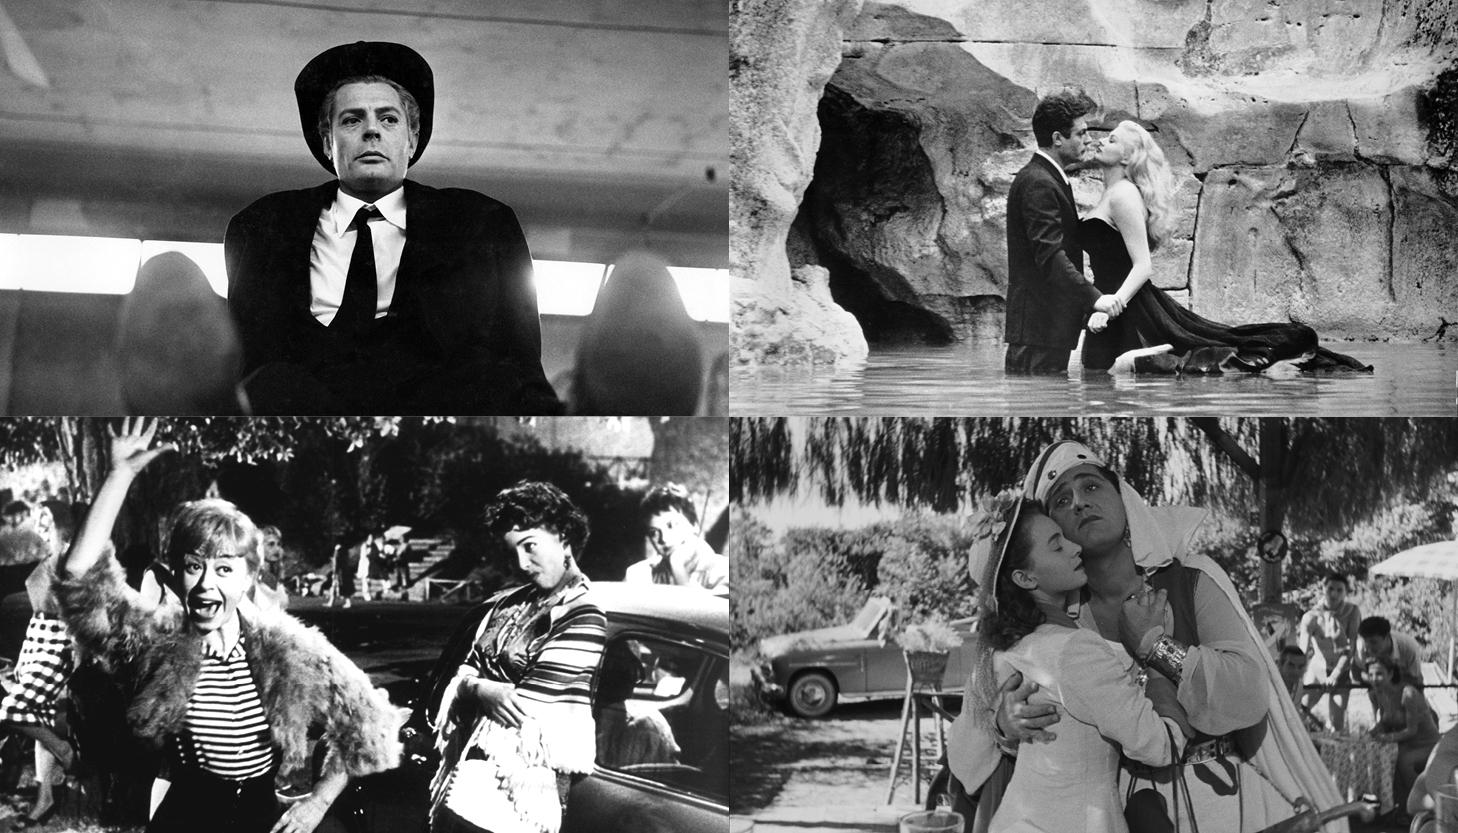 Clockwise from top left: Black-and-white still of a person sitting with legs outstretched and wearing a tuxedo and hat. Black-and-white still of a couple standing in a fountain, facing each other as if to kiss. Black-and-white still of a couple embracing; on the right is a person wearing a dress and hat, and on the right is a person in an Arabian headdress. Black-and-white still of a person with short, light hair who is waving and smiling widely while two people lean against a car. 